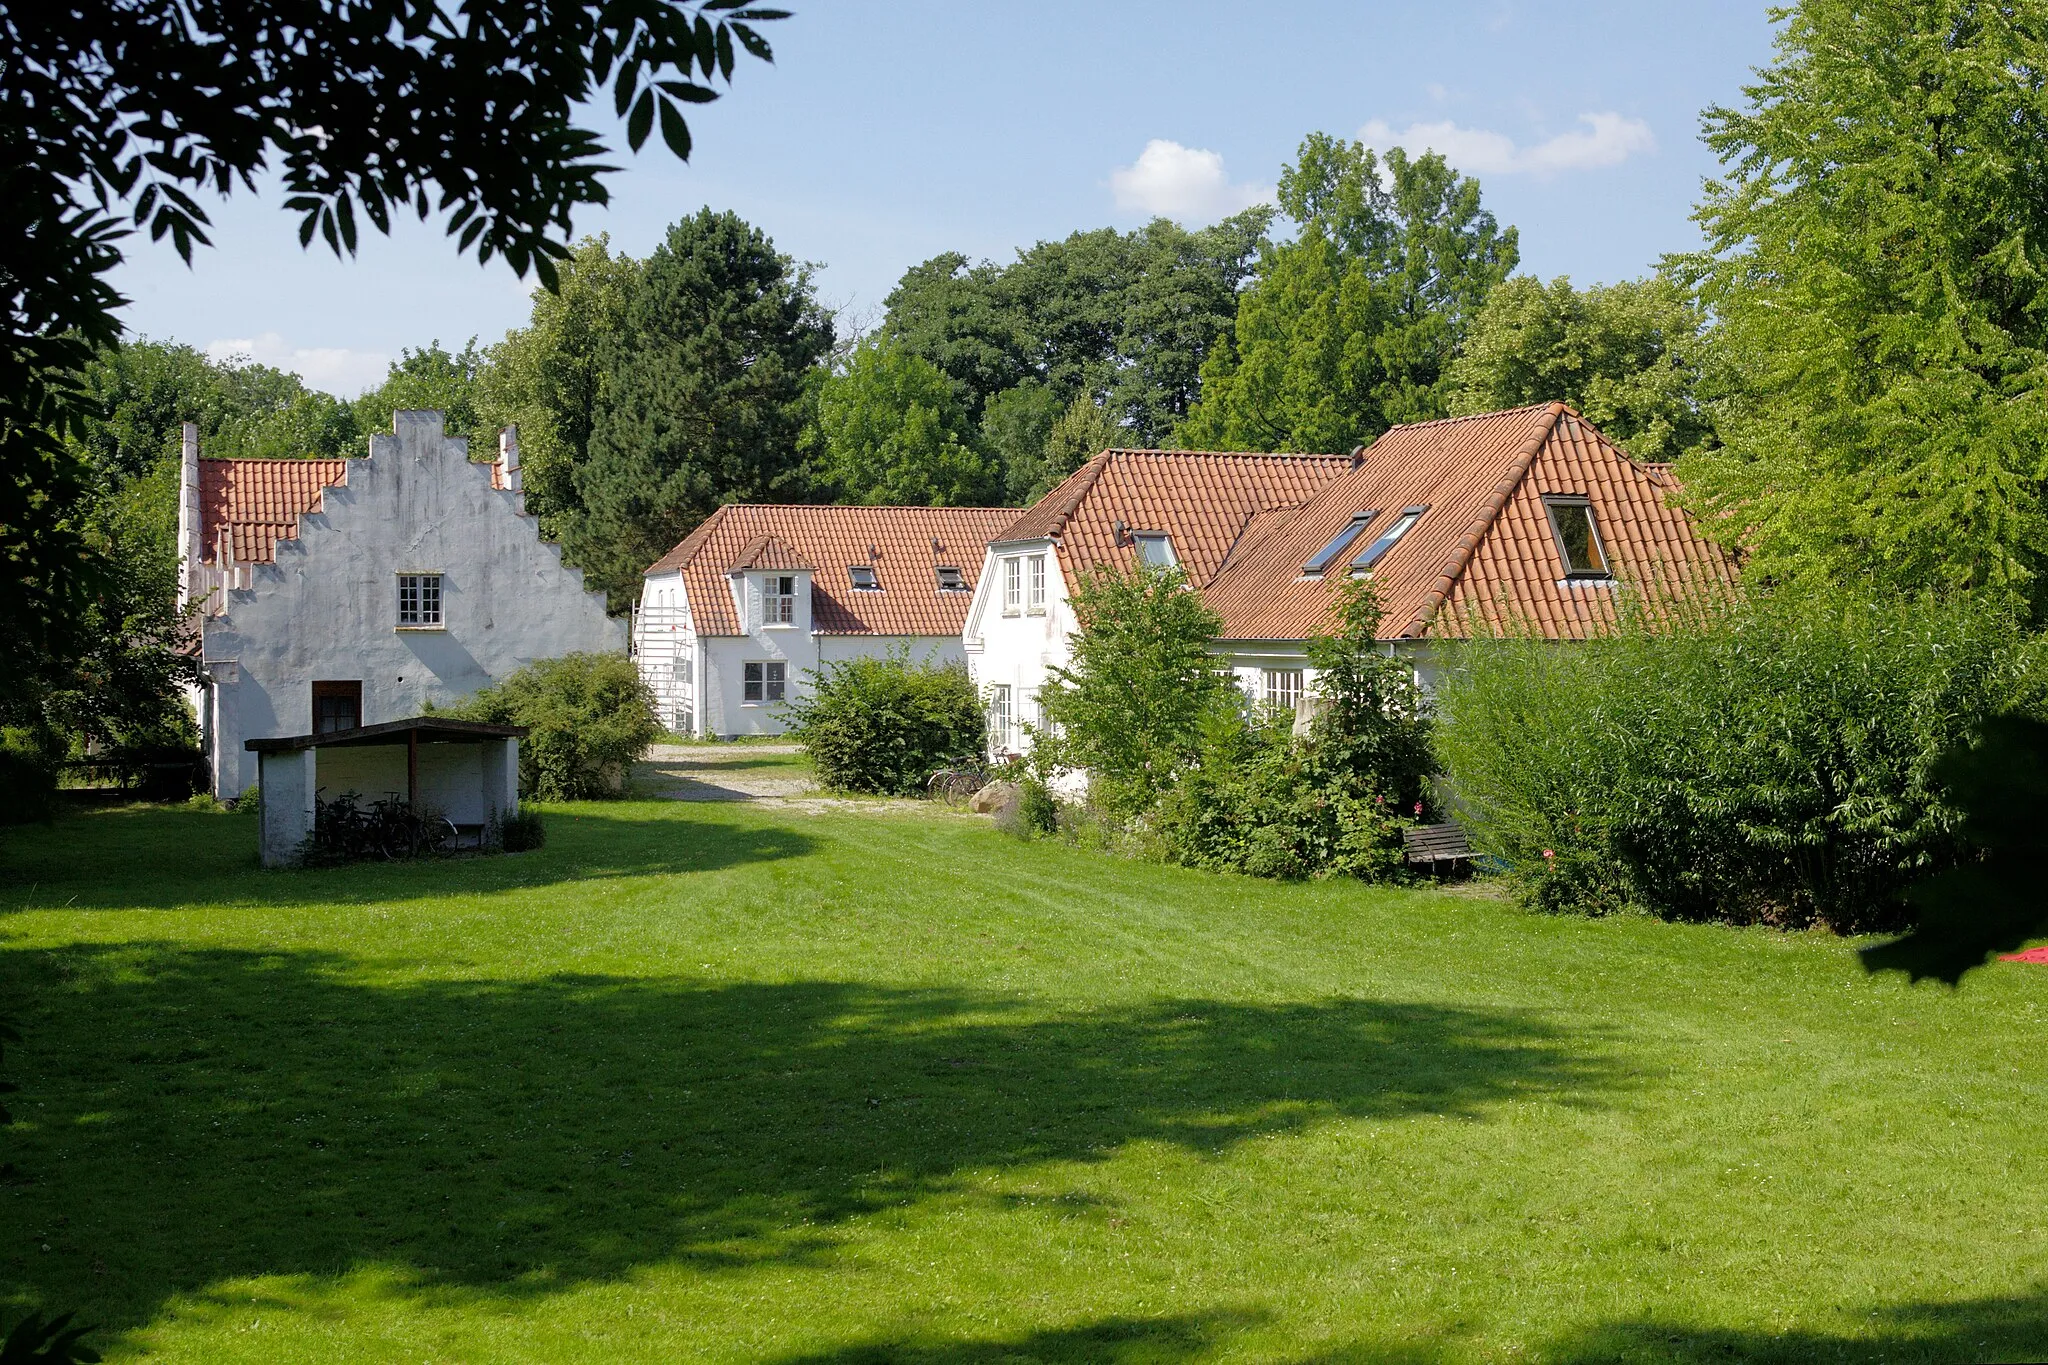 Photo showing: In the back of the garden of Blangstedgaard, there is a small artificial hill. This picture looks over the garden and the manor itself from that hill.